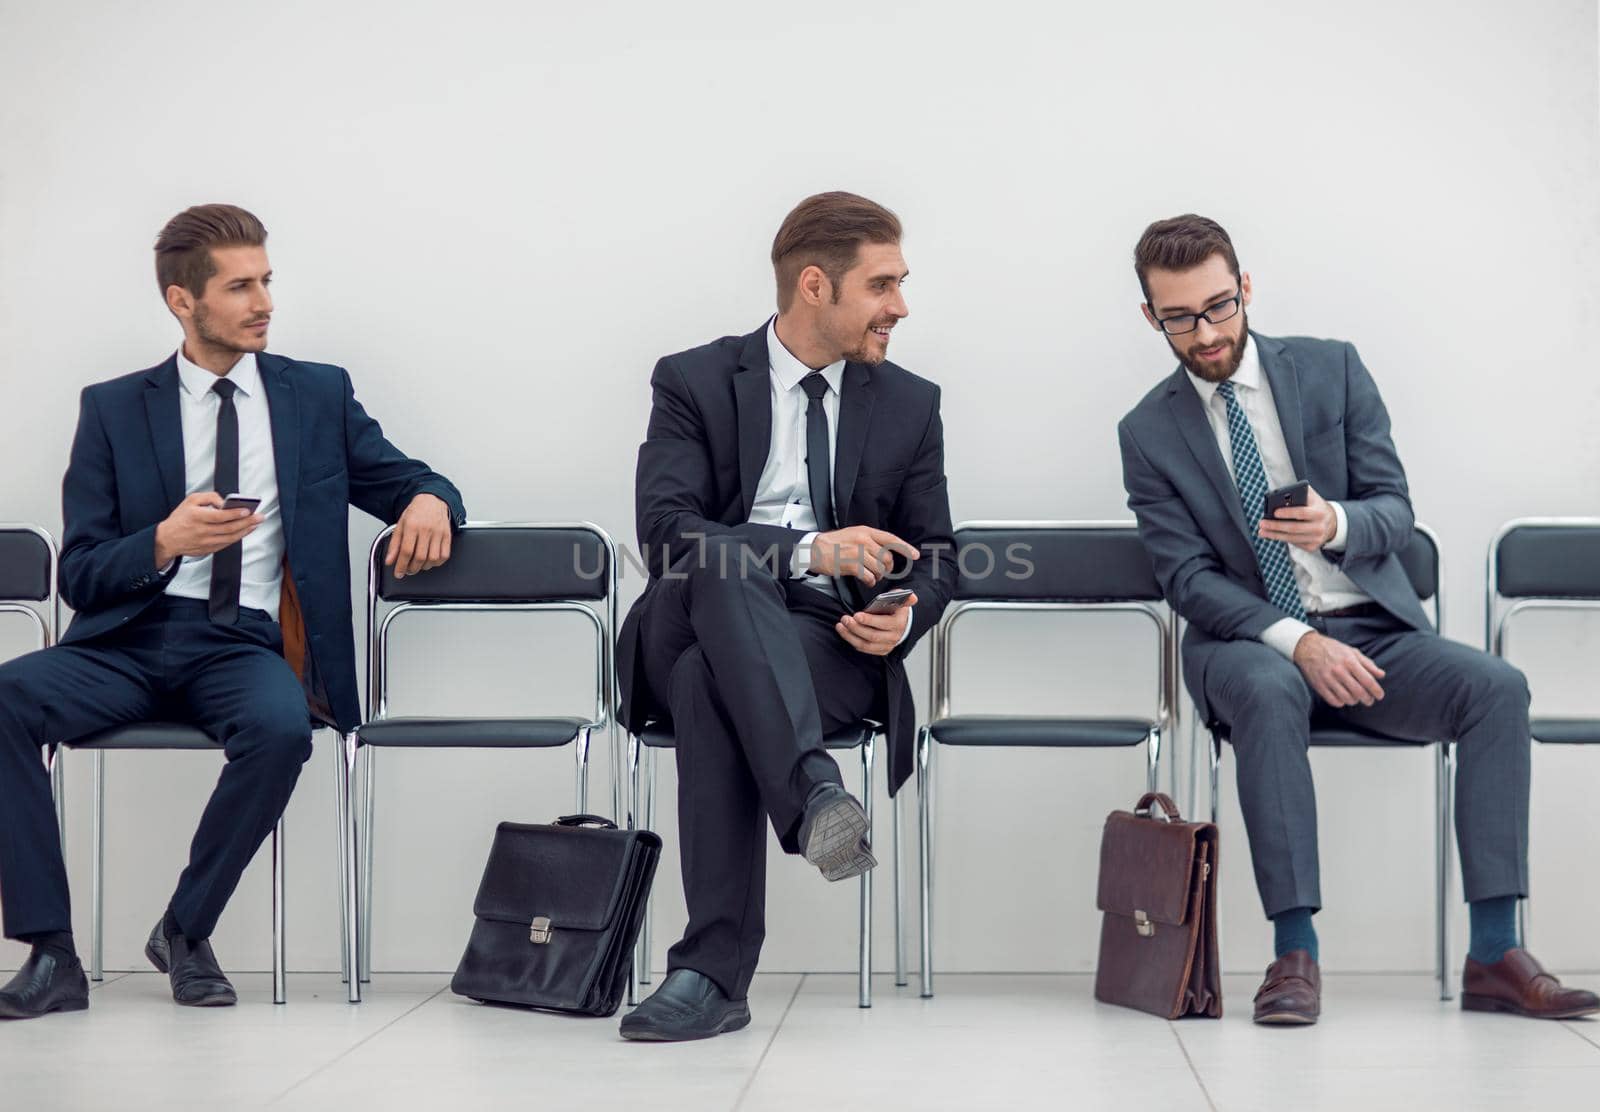 employees with smartphones sitting in the office hallway by asdf